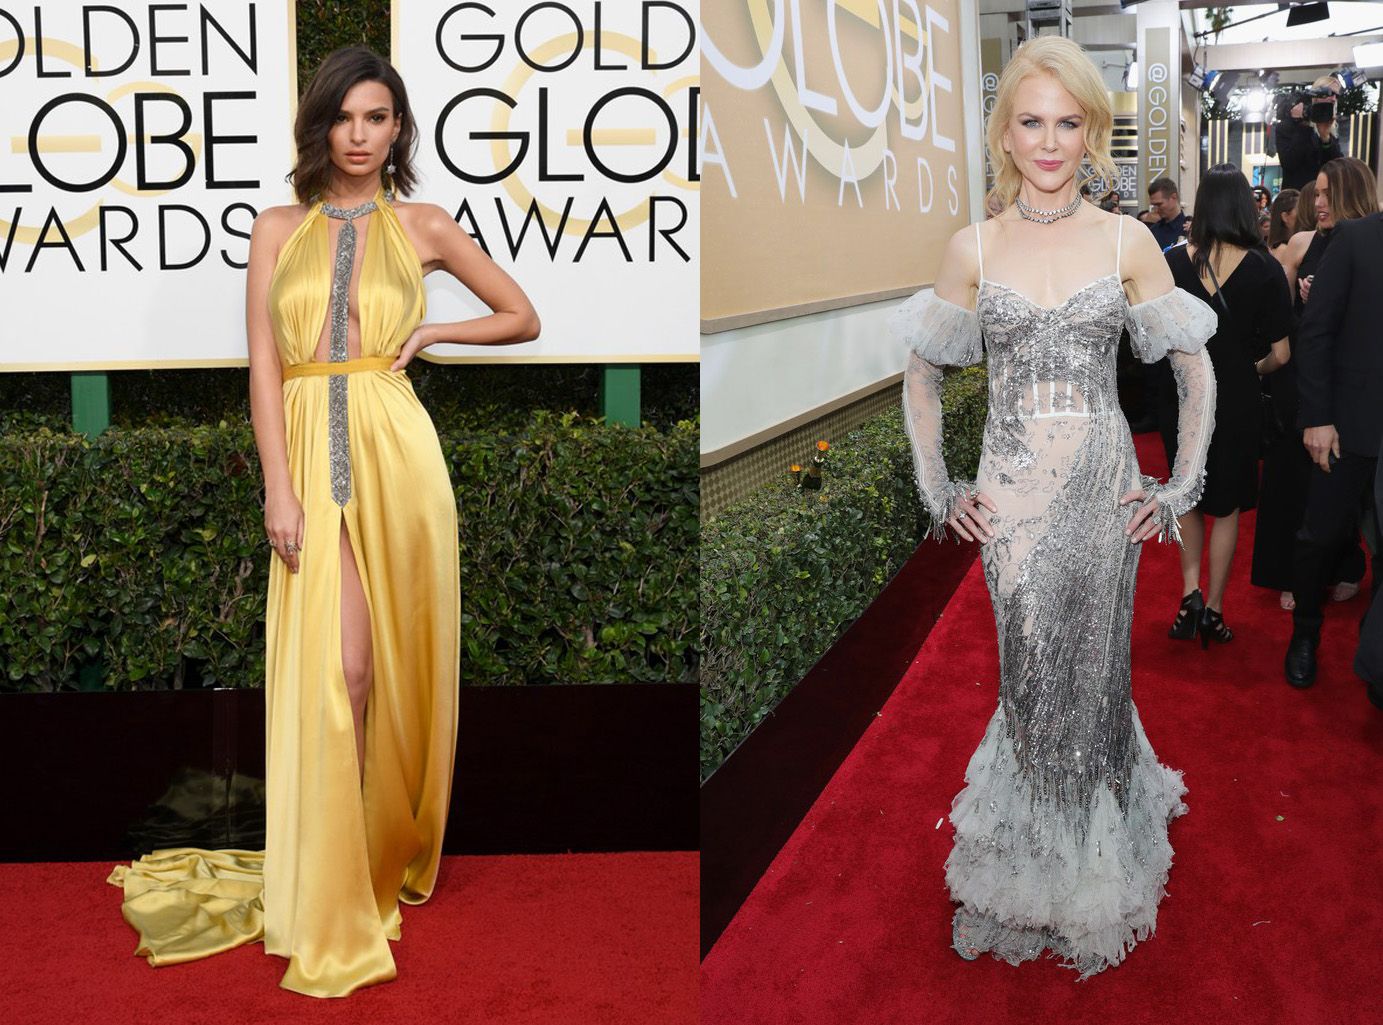 The Glamorous Style of Celebrities on the Red Carpet of the 2017 Golden Globe Awards